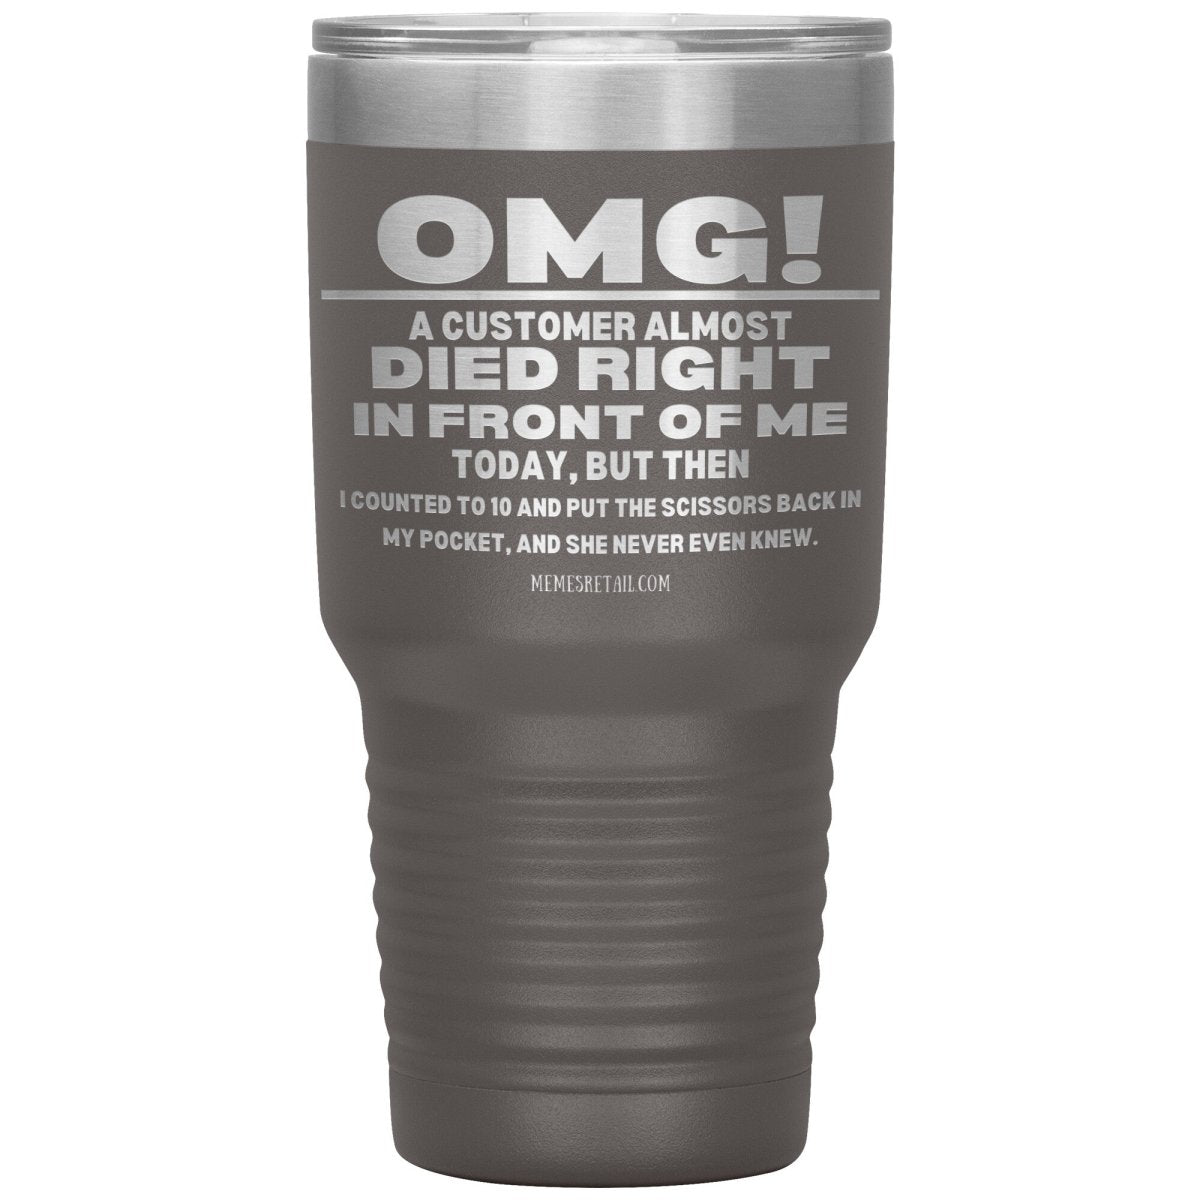 OMG! A Customer Almost Died Right In Front Of Me Tumbler, 30oz Insulated Tumbler / Pewter - MemesRetail.com